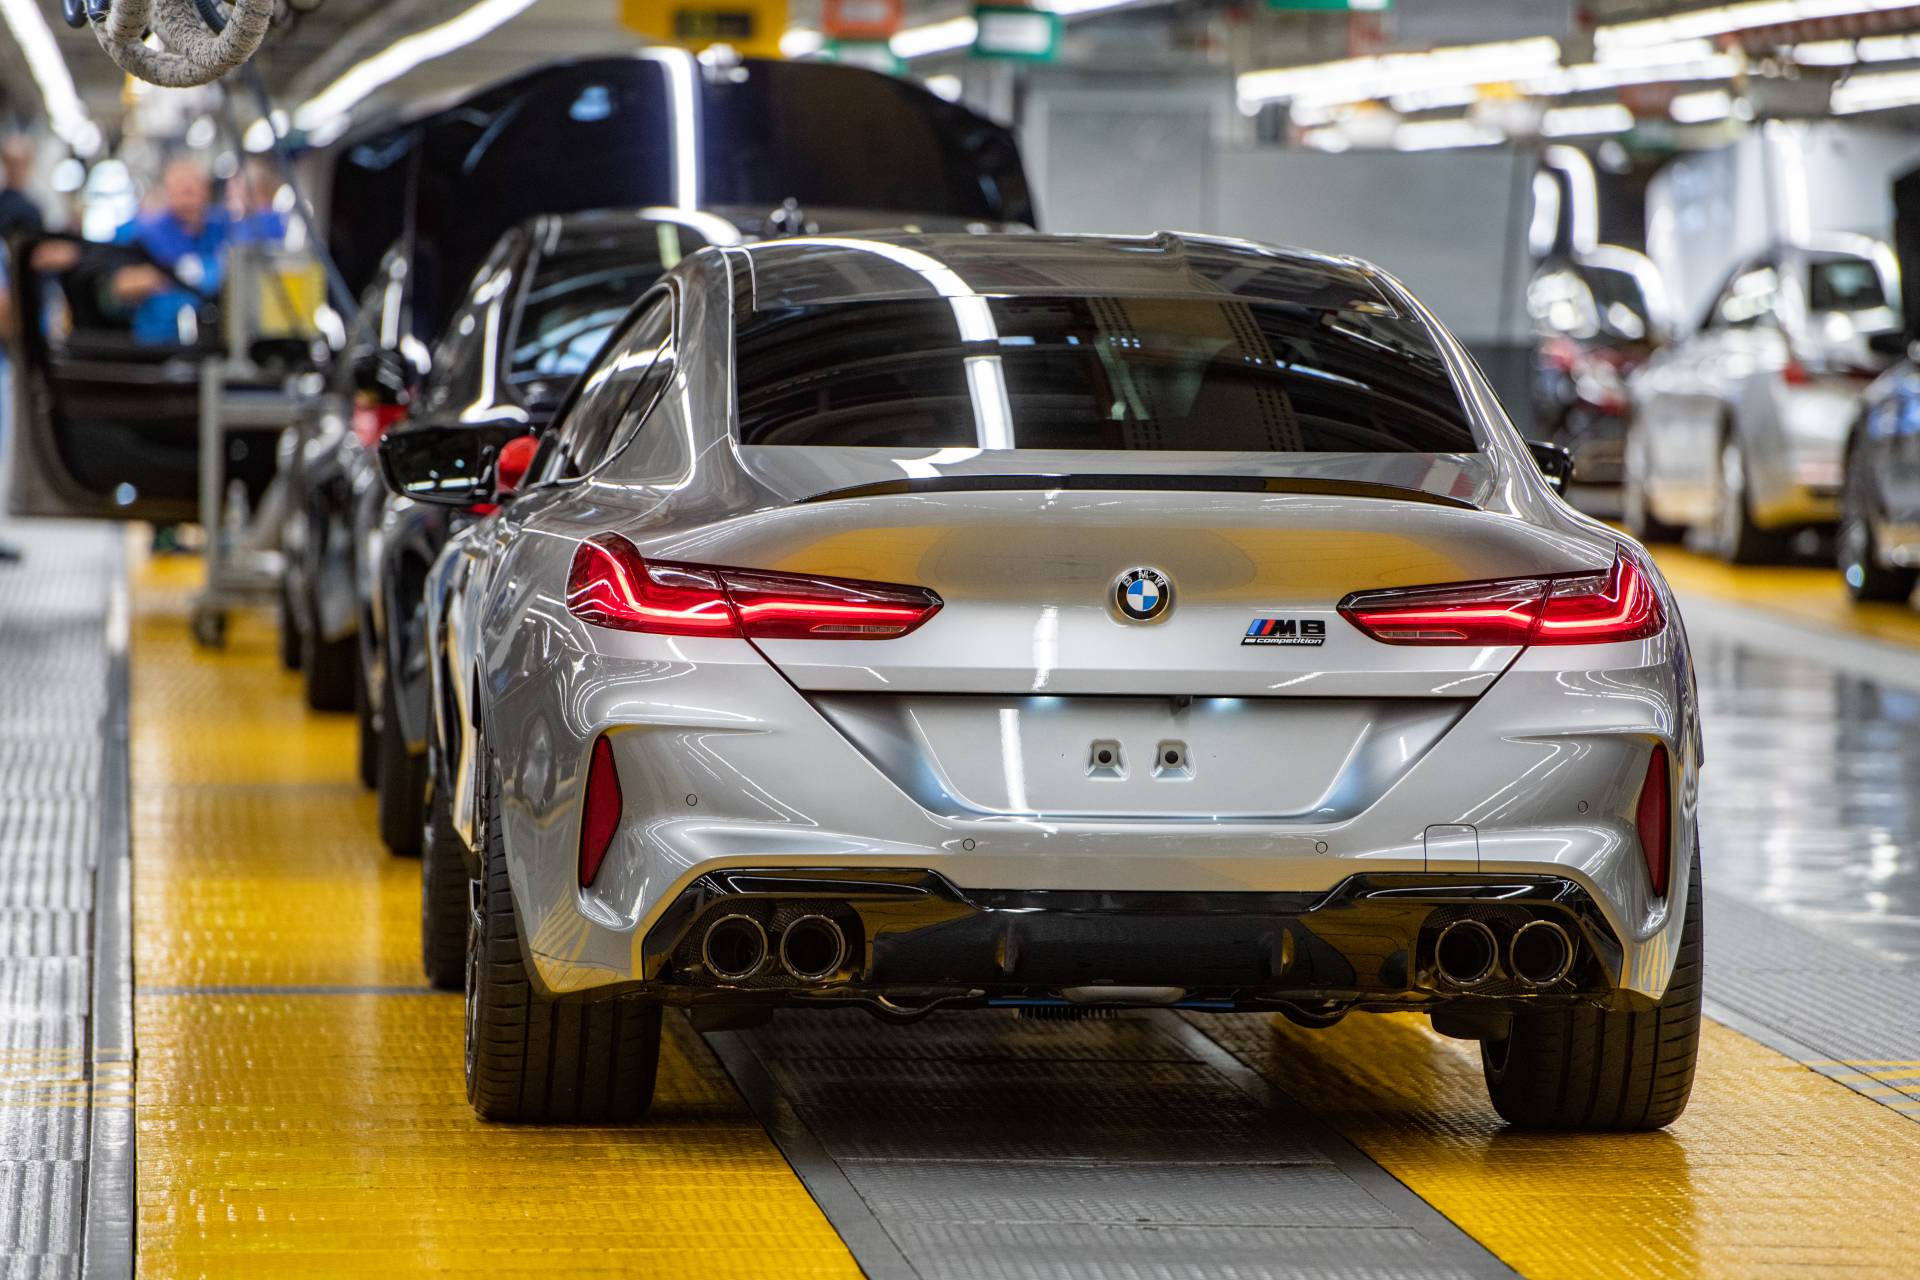 2020 Bmw M8 Gran Coupe Enters Production In Time For La